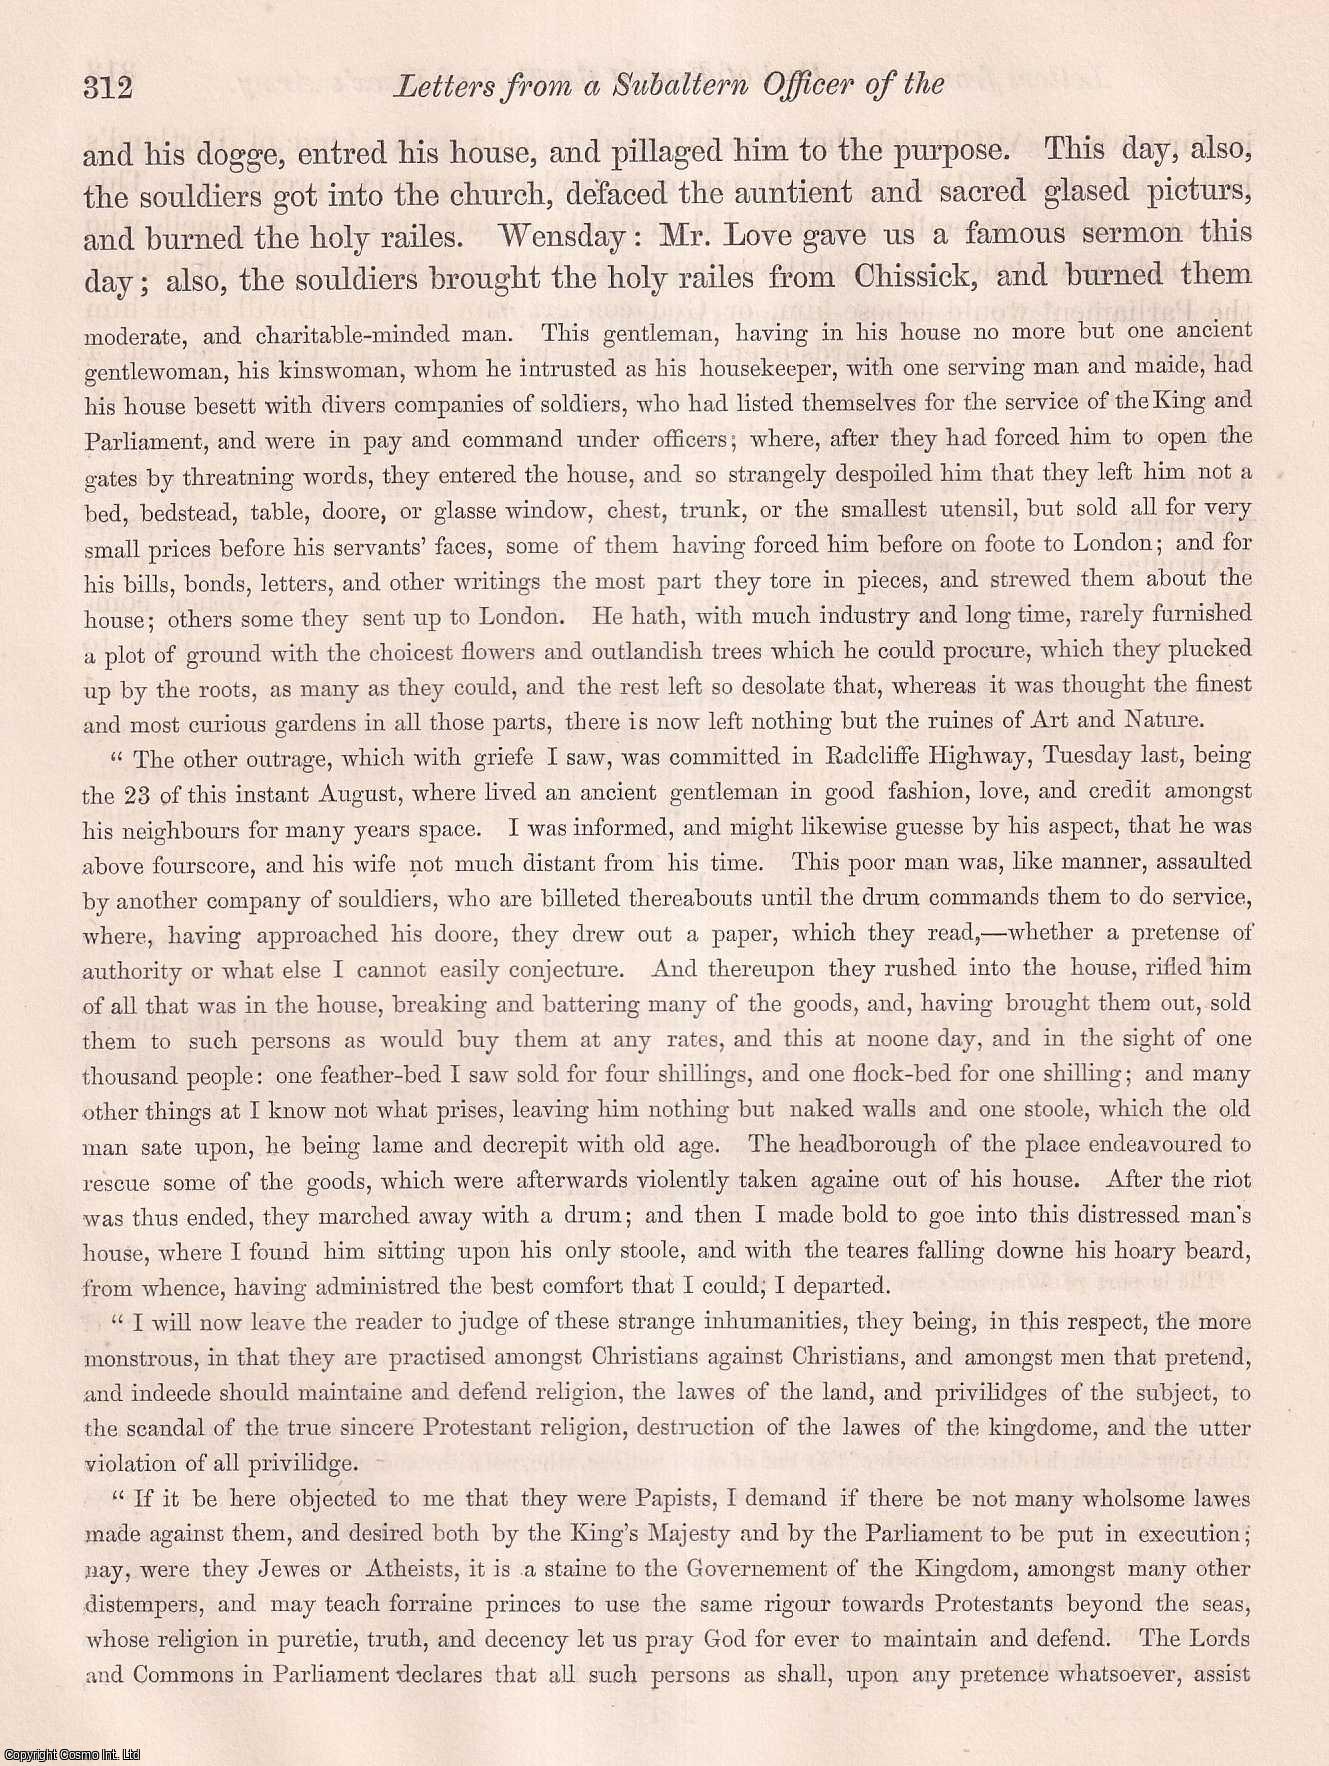 ---. - Letters from a Subaltern Officer of the Earl of Essex's Army, written in the Summer and Autumn of 1642; detailing the early movements of that portion of the Parliament Forces which was formed by the Volunteers of the Metropolis. A rare original article from the journal Archaeologia, 1853.